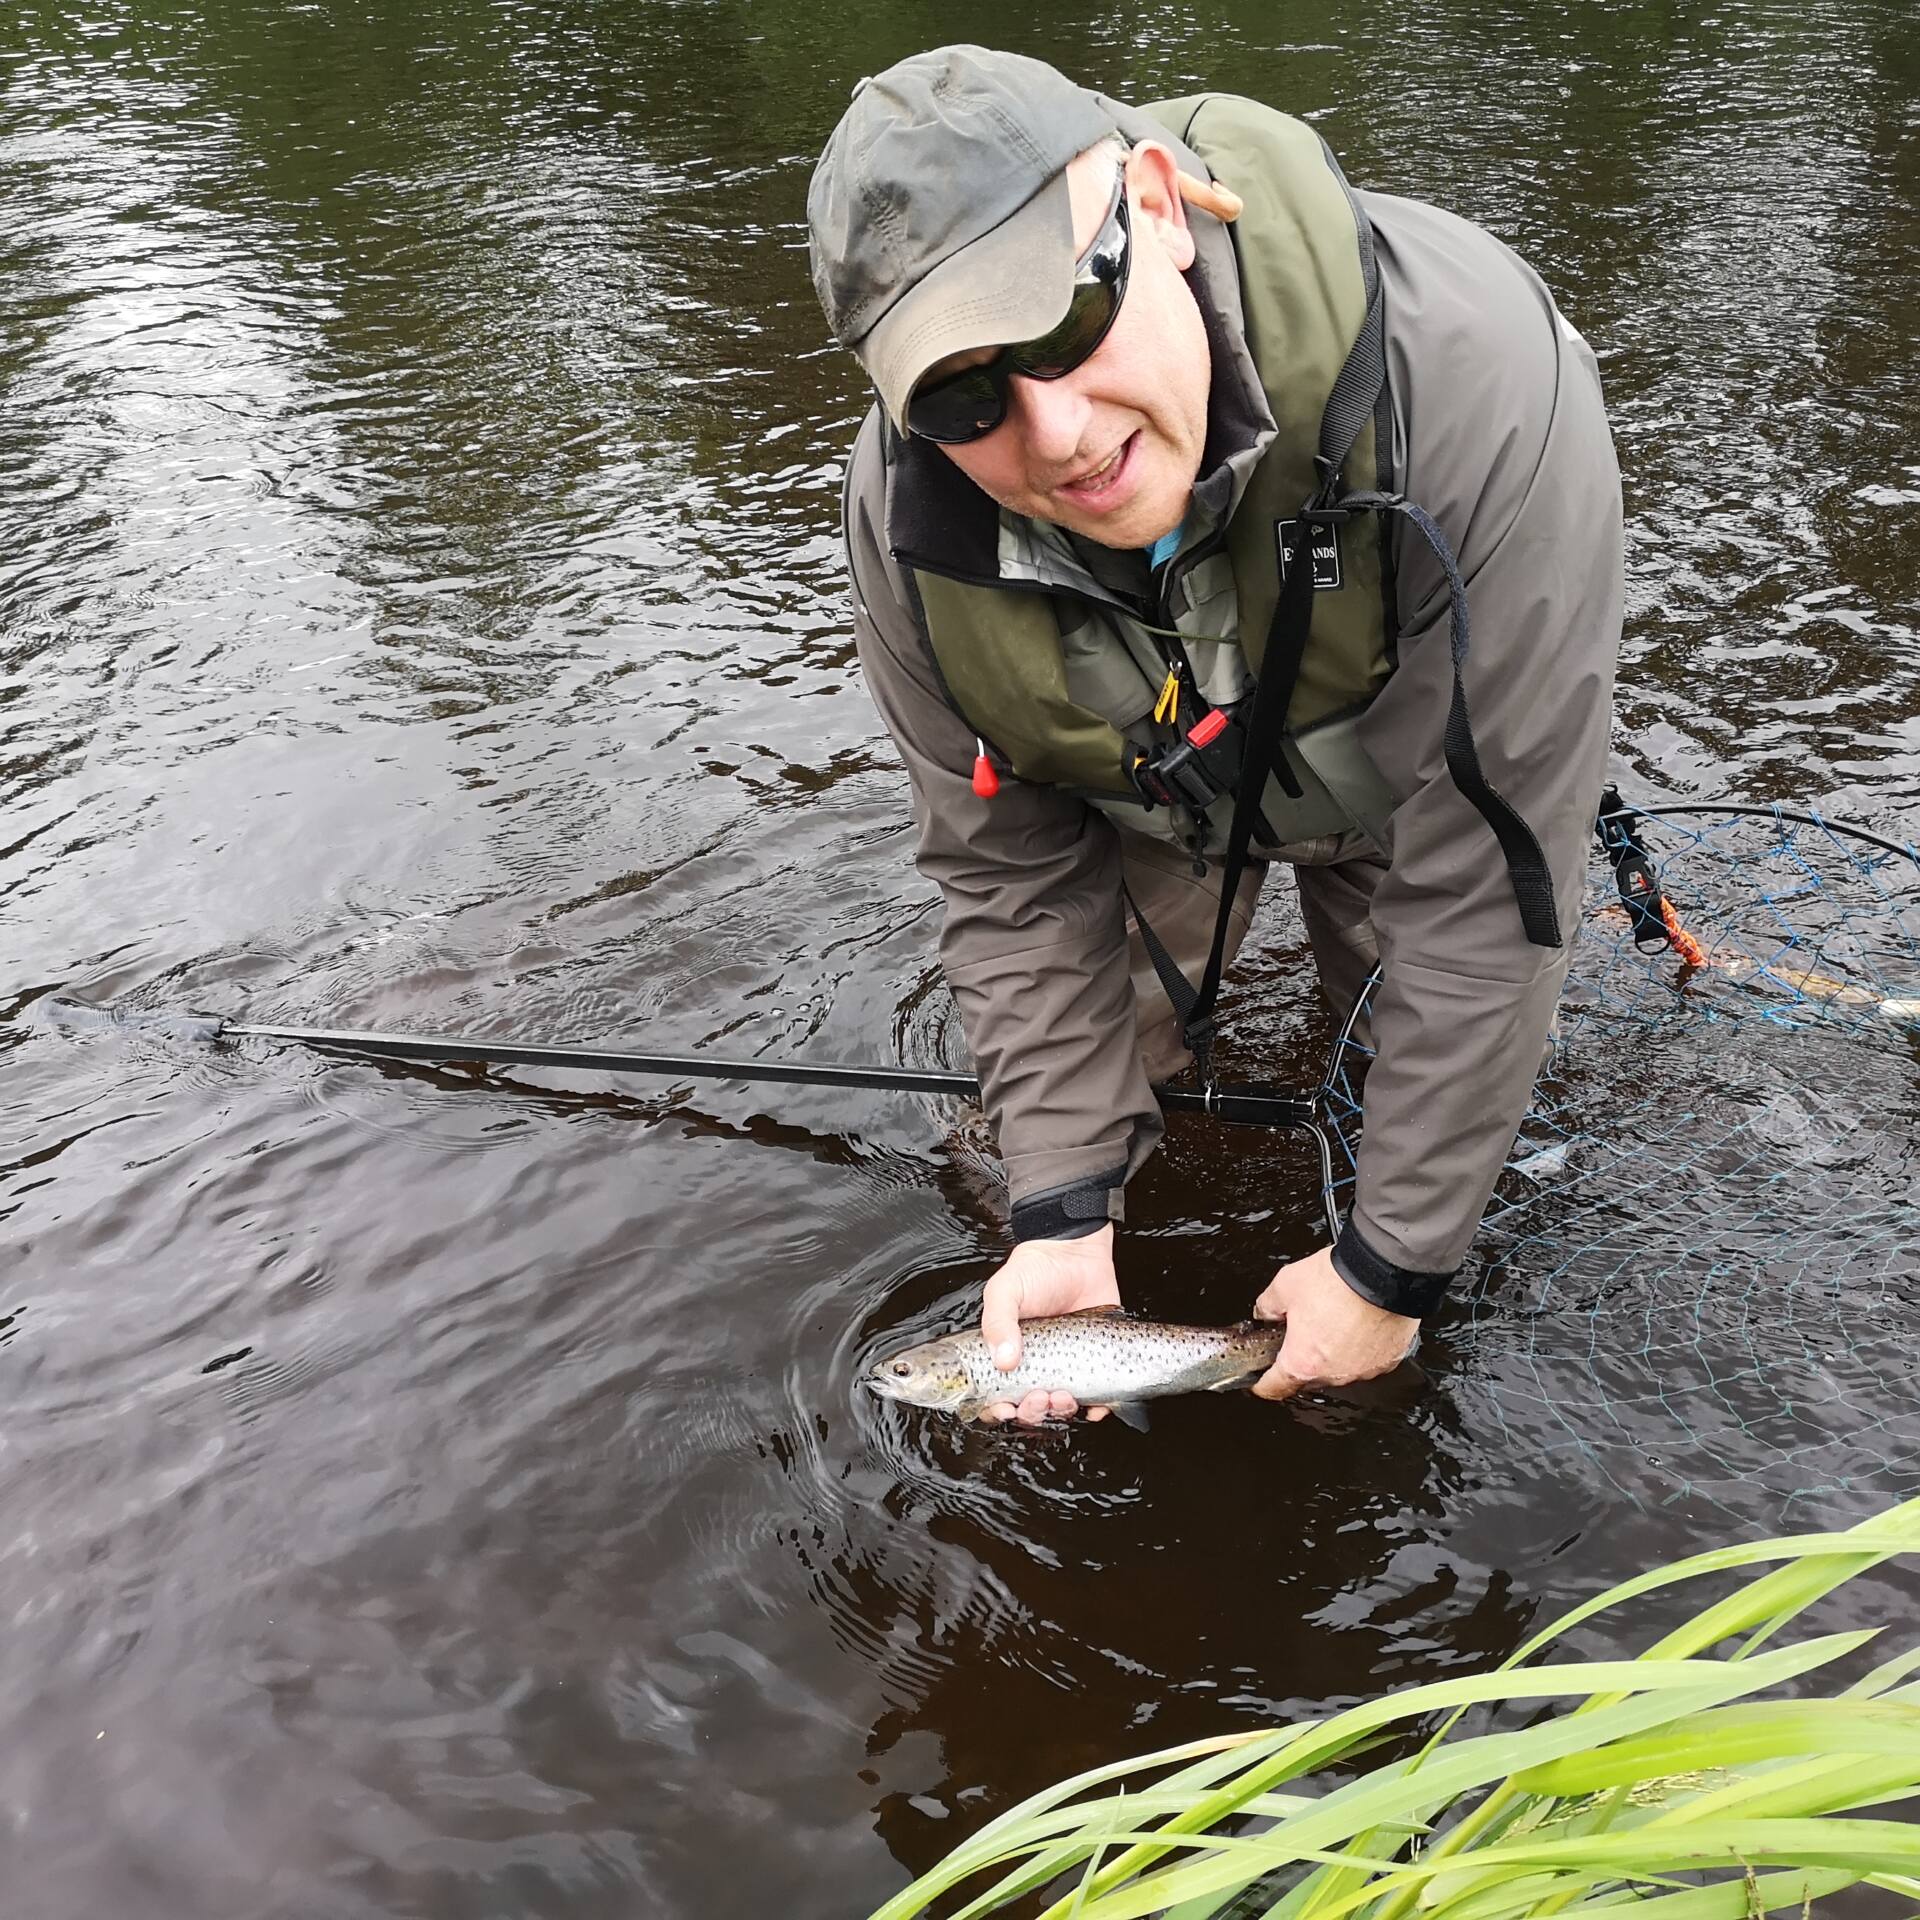 Take a Friend Fishing campaign back for Easter - Fly Fishing and